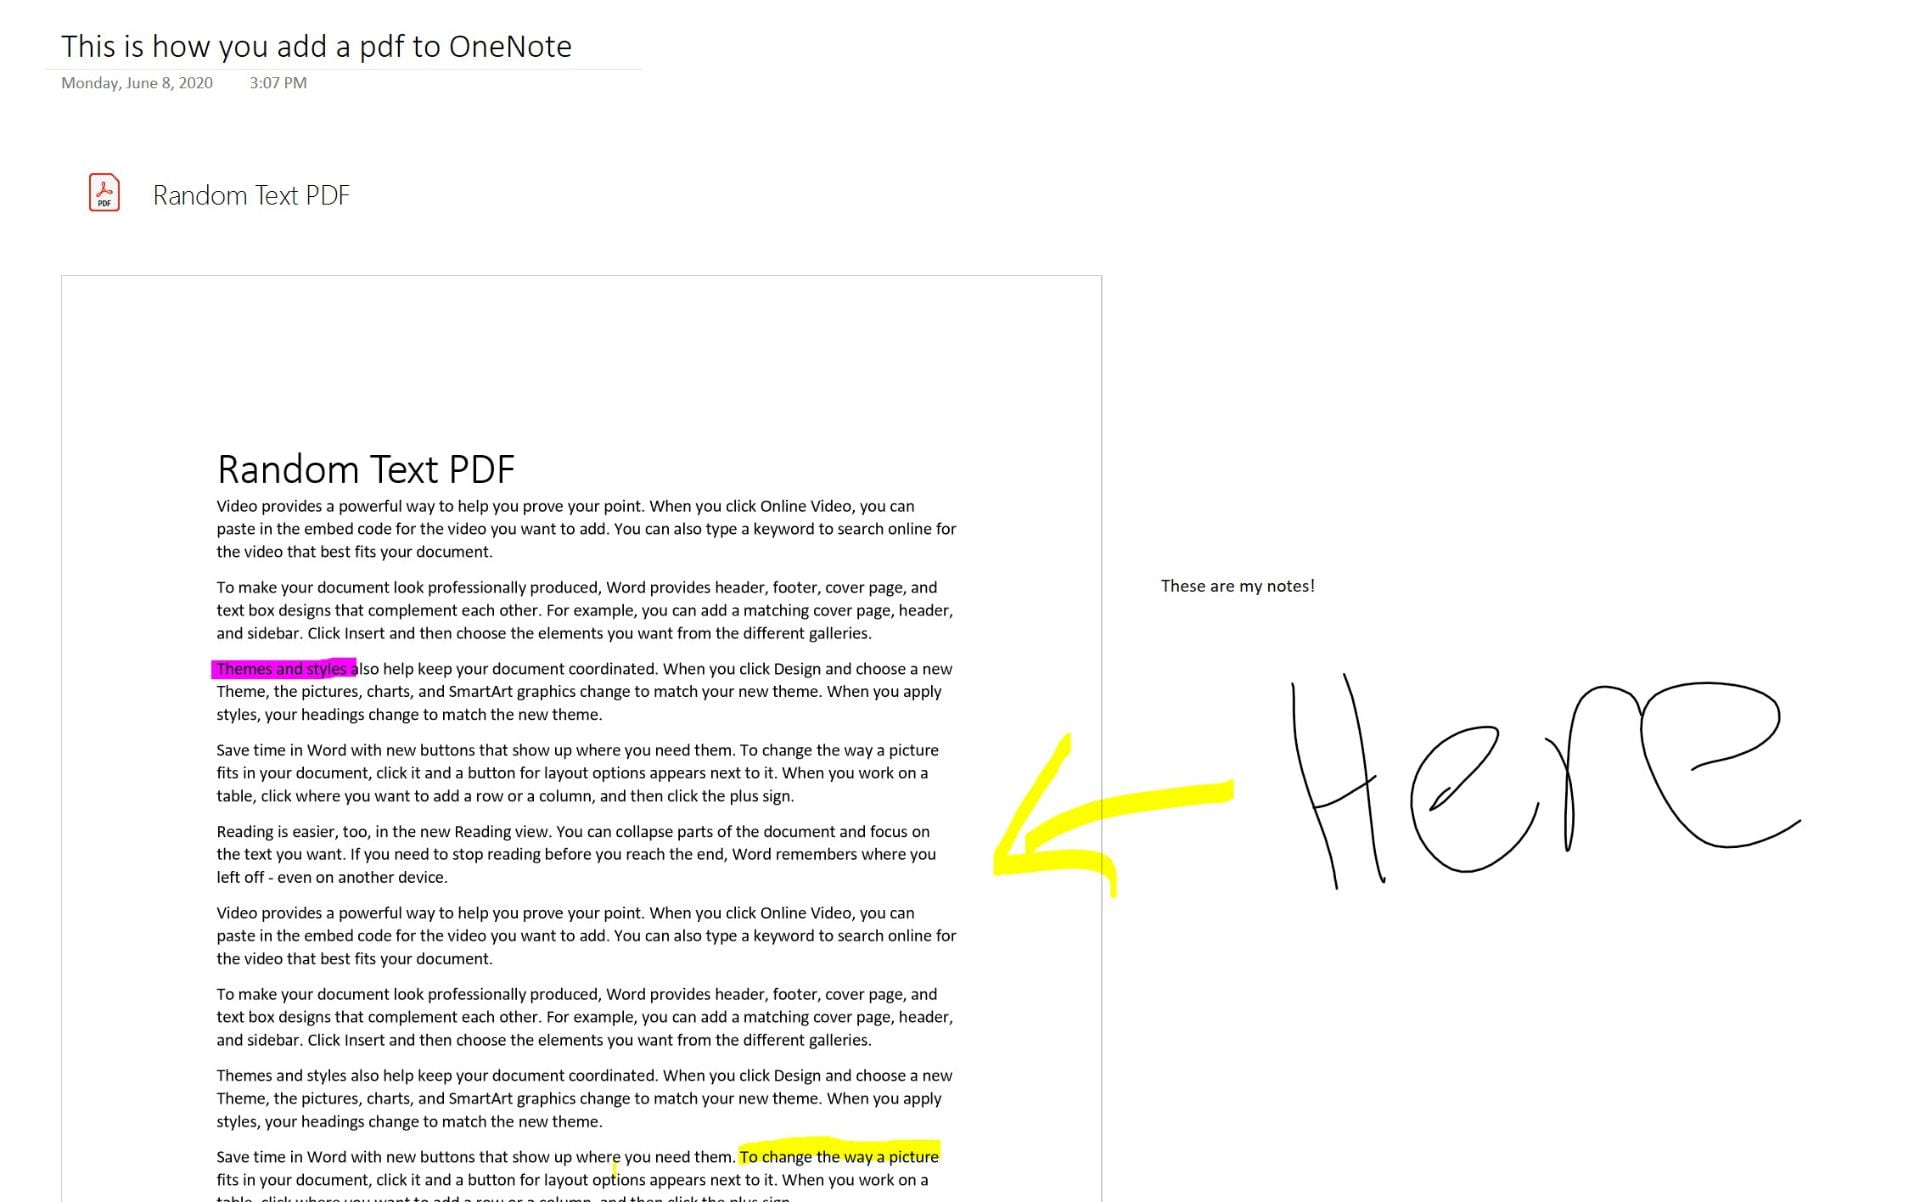 Taking Notes on a PDF in OneNote  Teaching Innovation and